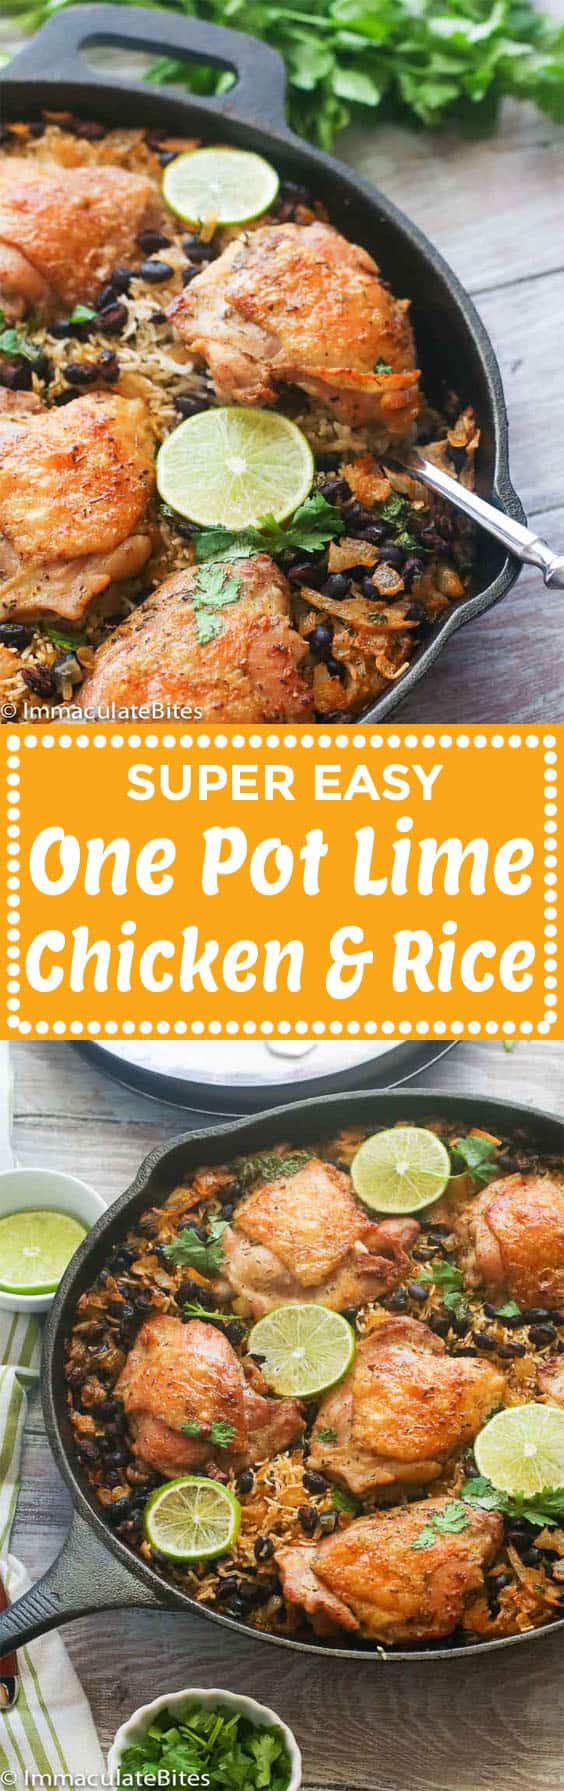 One pot lime chicken and rice.